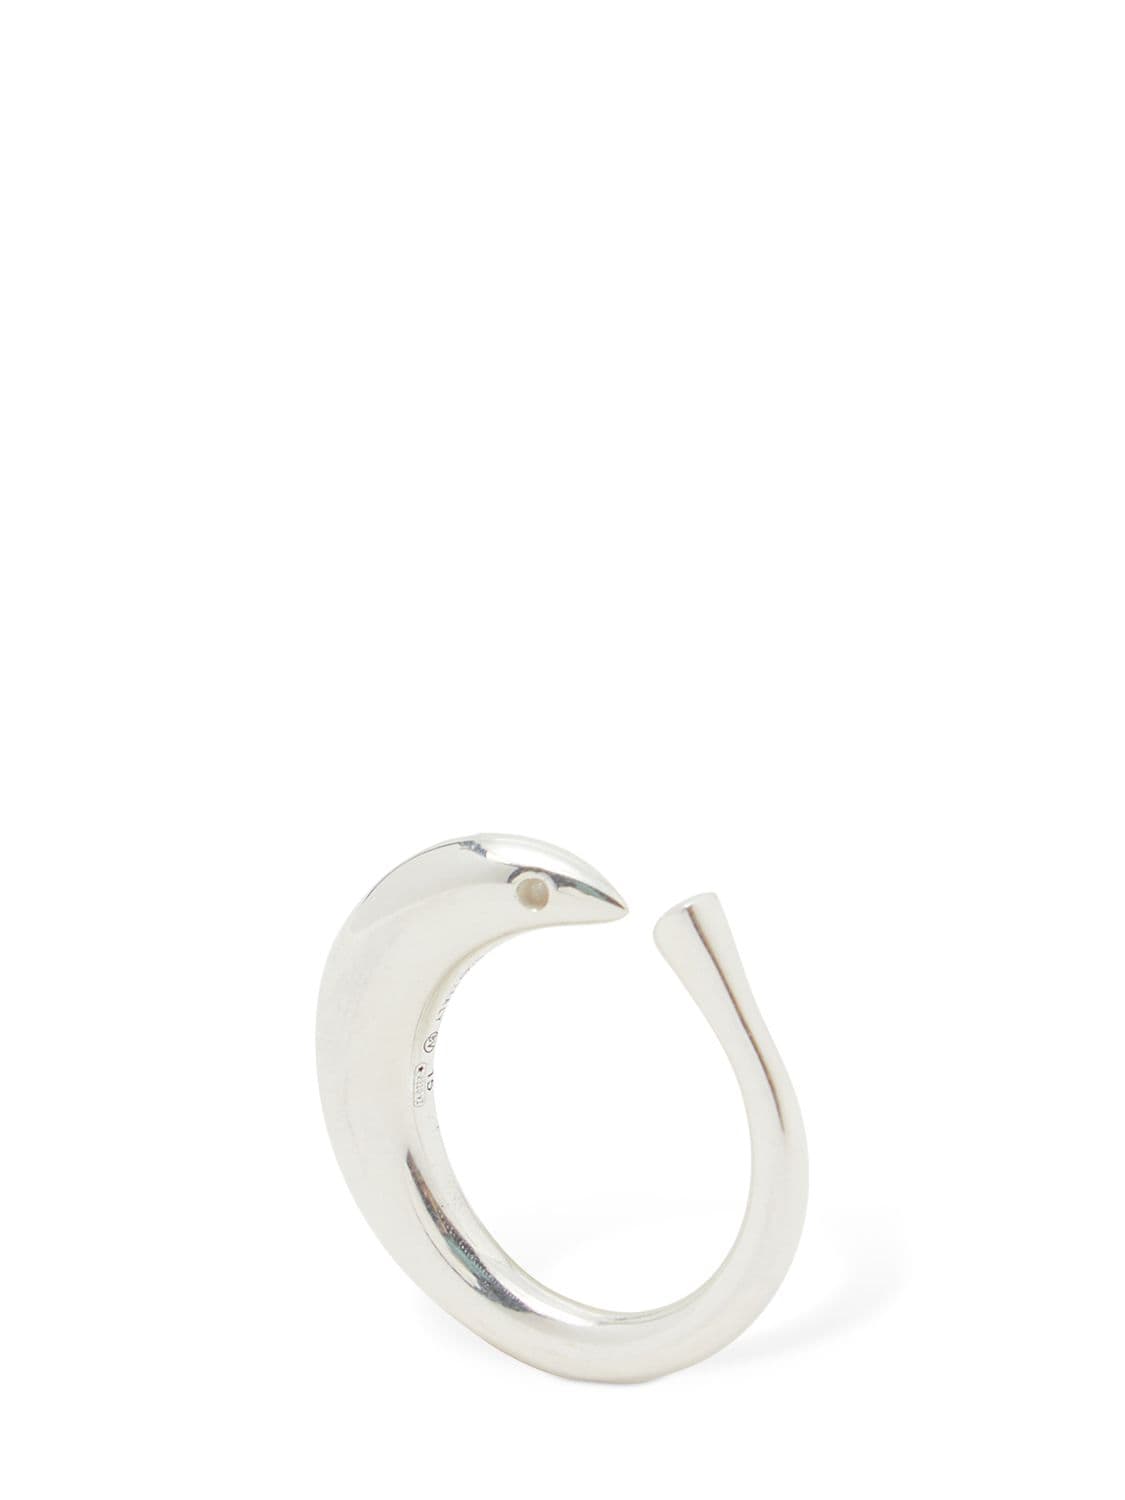 Image of Sardine Sterling Silver Ring